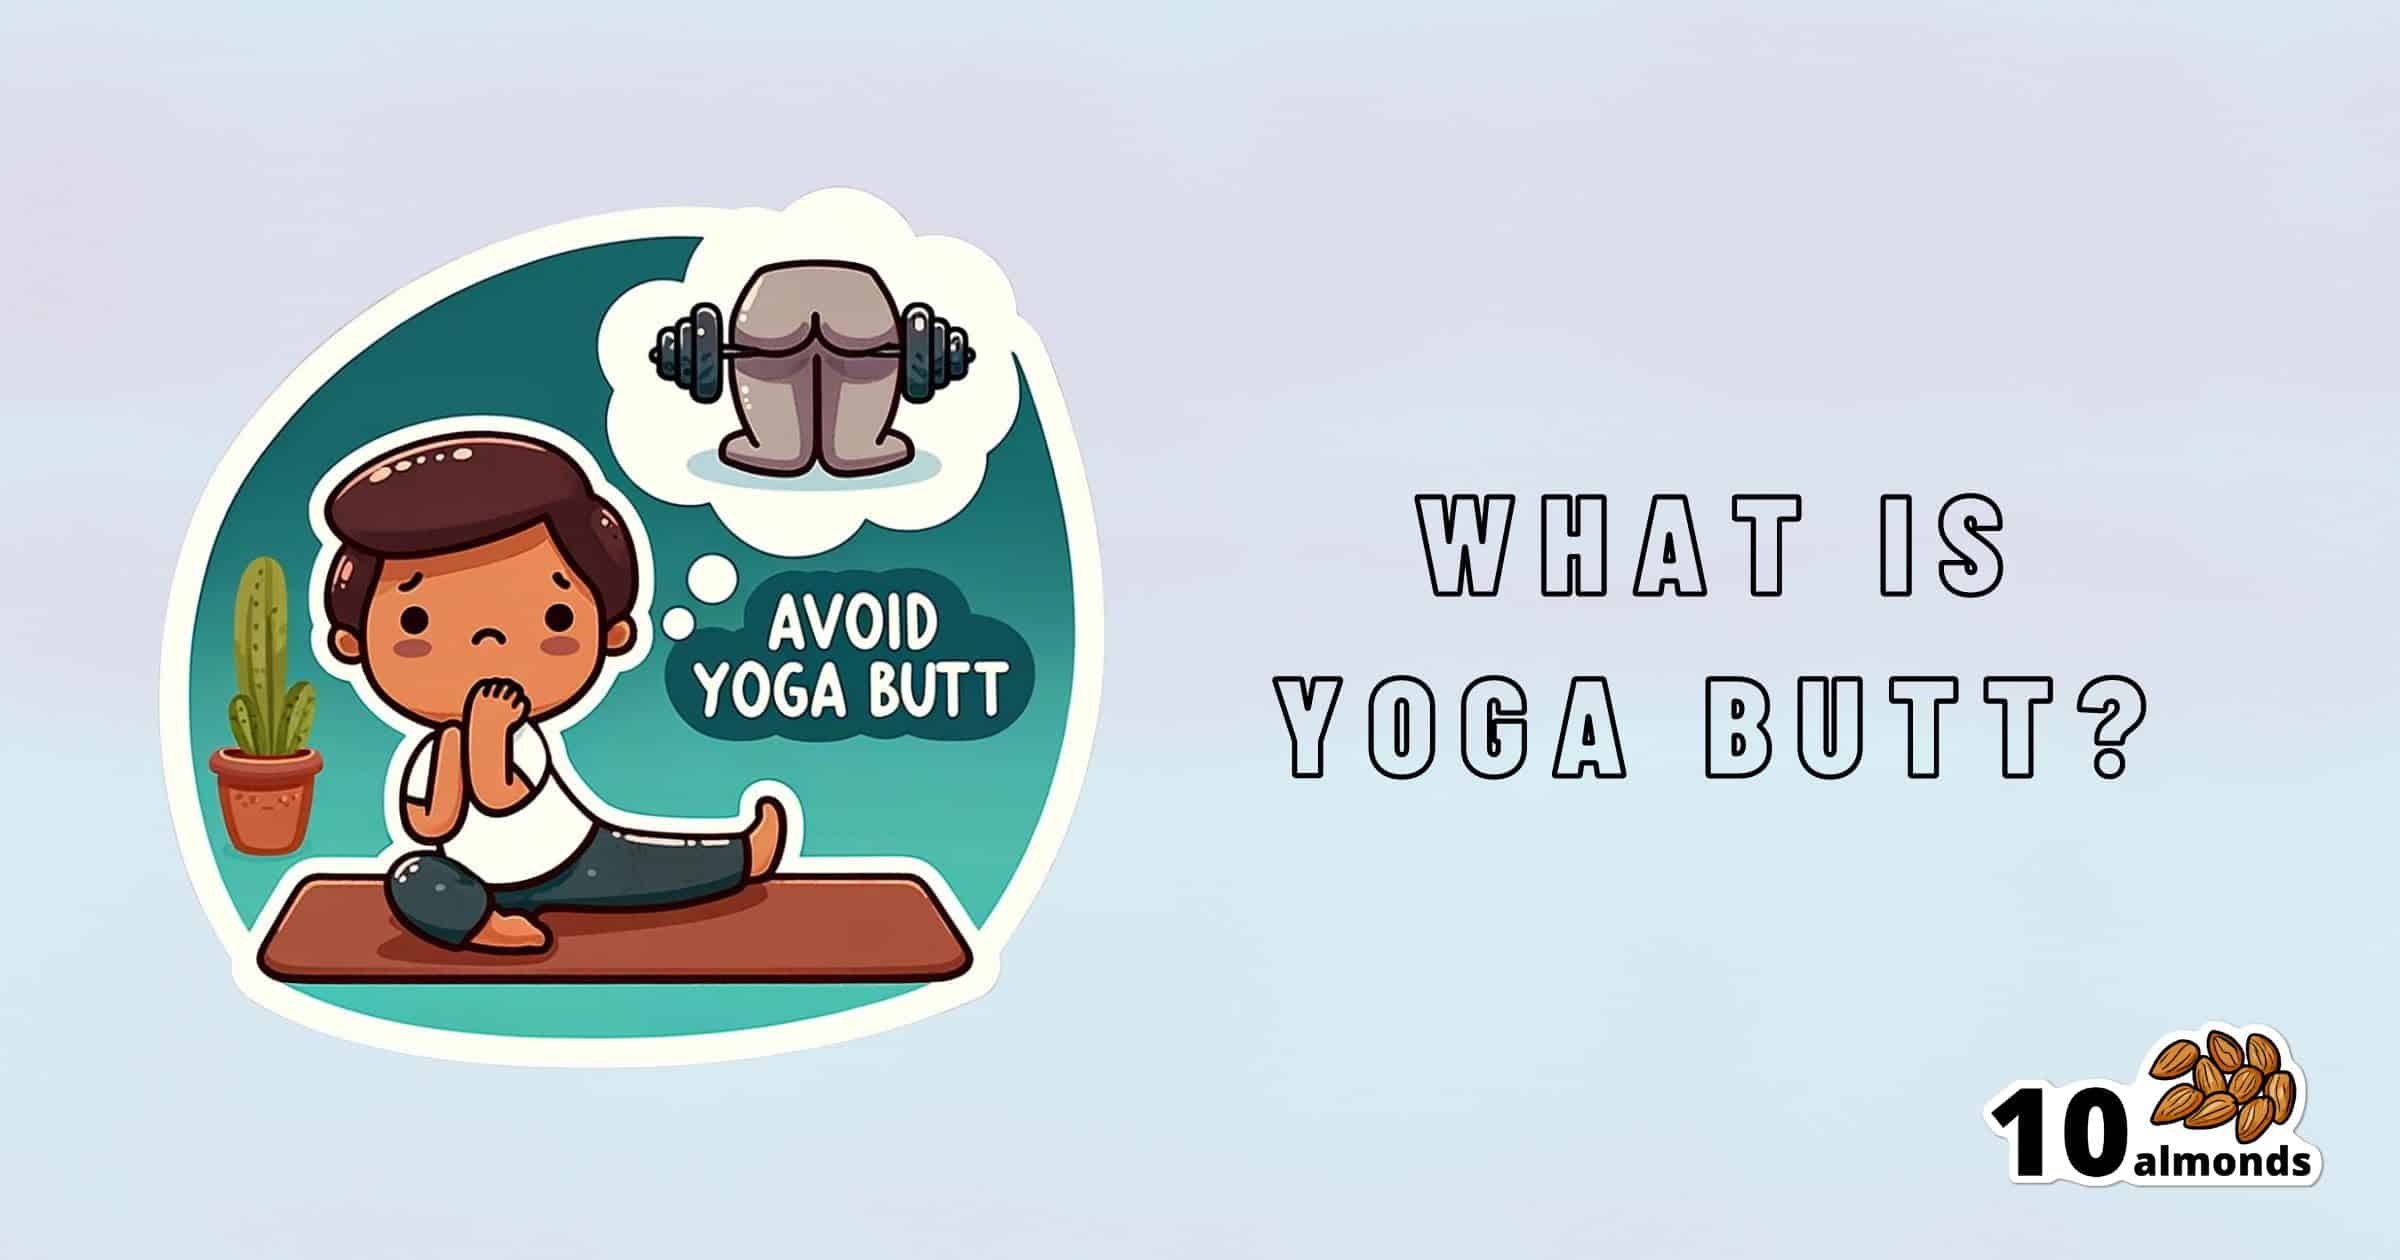 A graphic shows a person sitting on a yoga mat with hands pressed together in thought. Nearby, a cactus adds a touch of nature, while a speech bubble with an illustration of a butt and weights says "Avoid Yoga Butt." Text beside the graphic reads, "What is Yoga Butt?" and "10 almonds" logo. Hamstring injuries can be avoided with proper stretching.